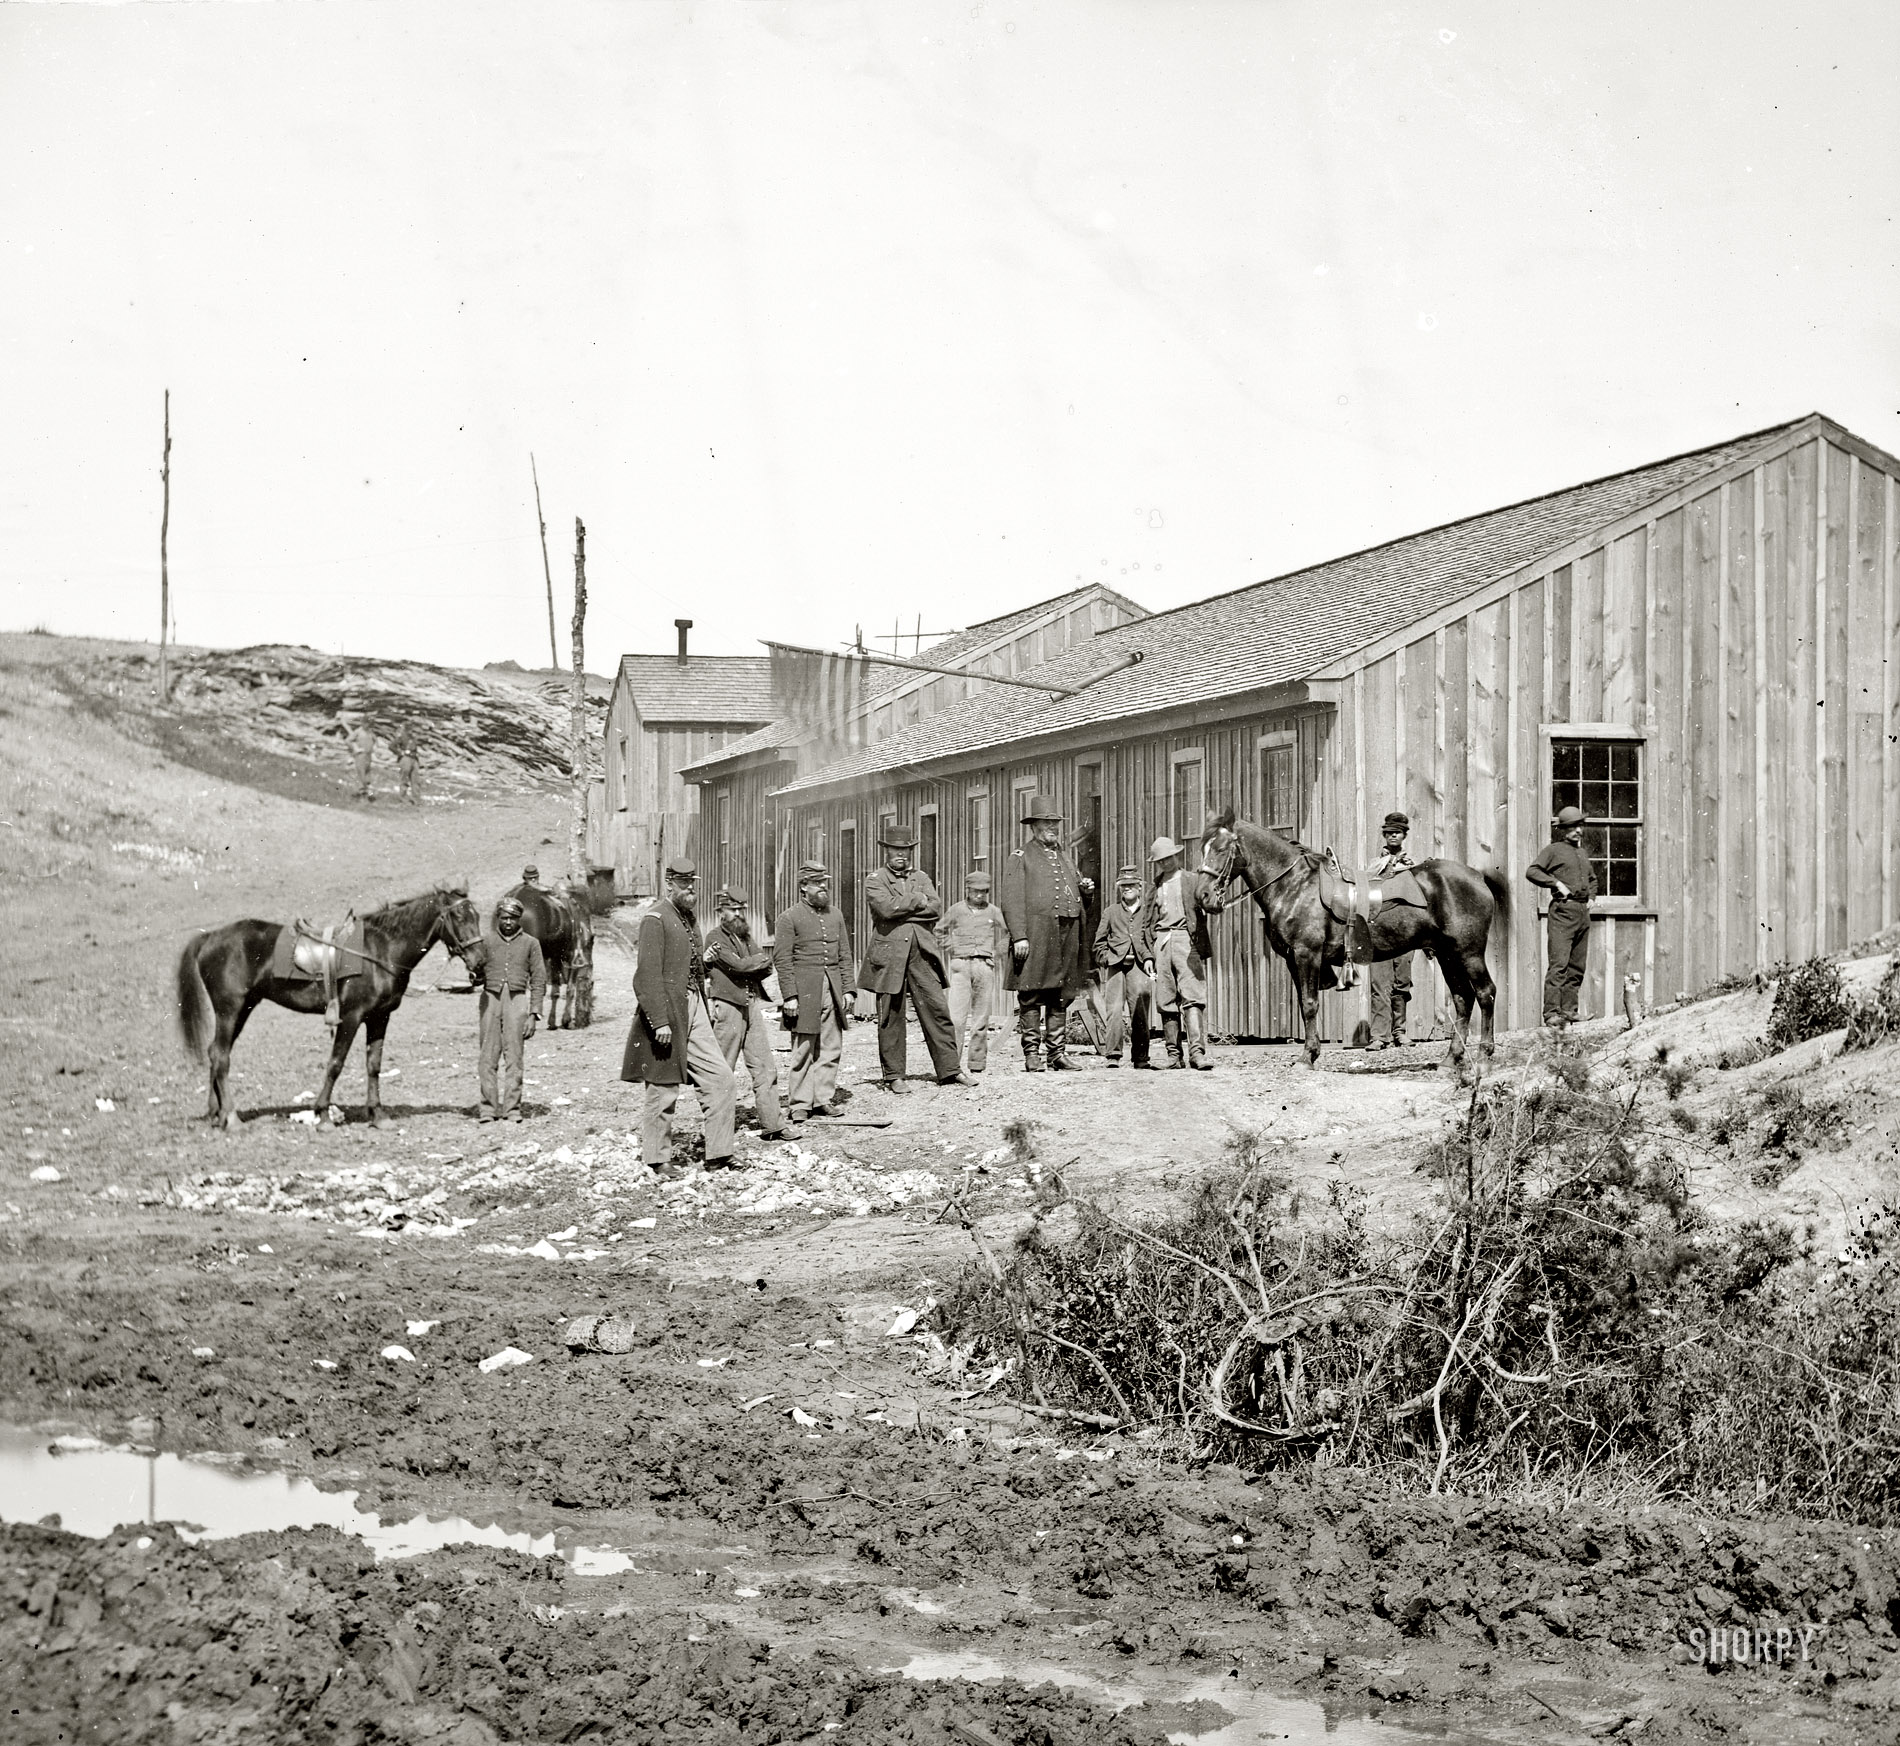 Yorktown, Virginia (vicinity), circa 1865. "Federal troops at Confederate winter quarters near Yorktown." View full size.